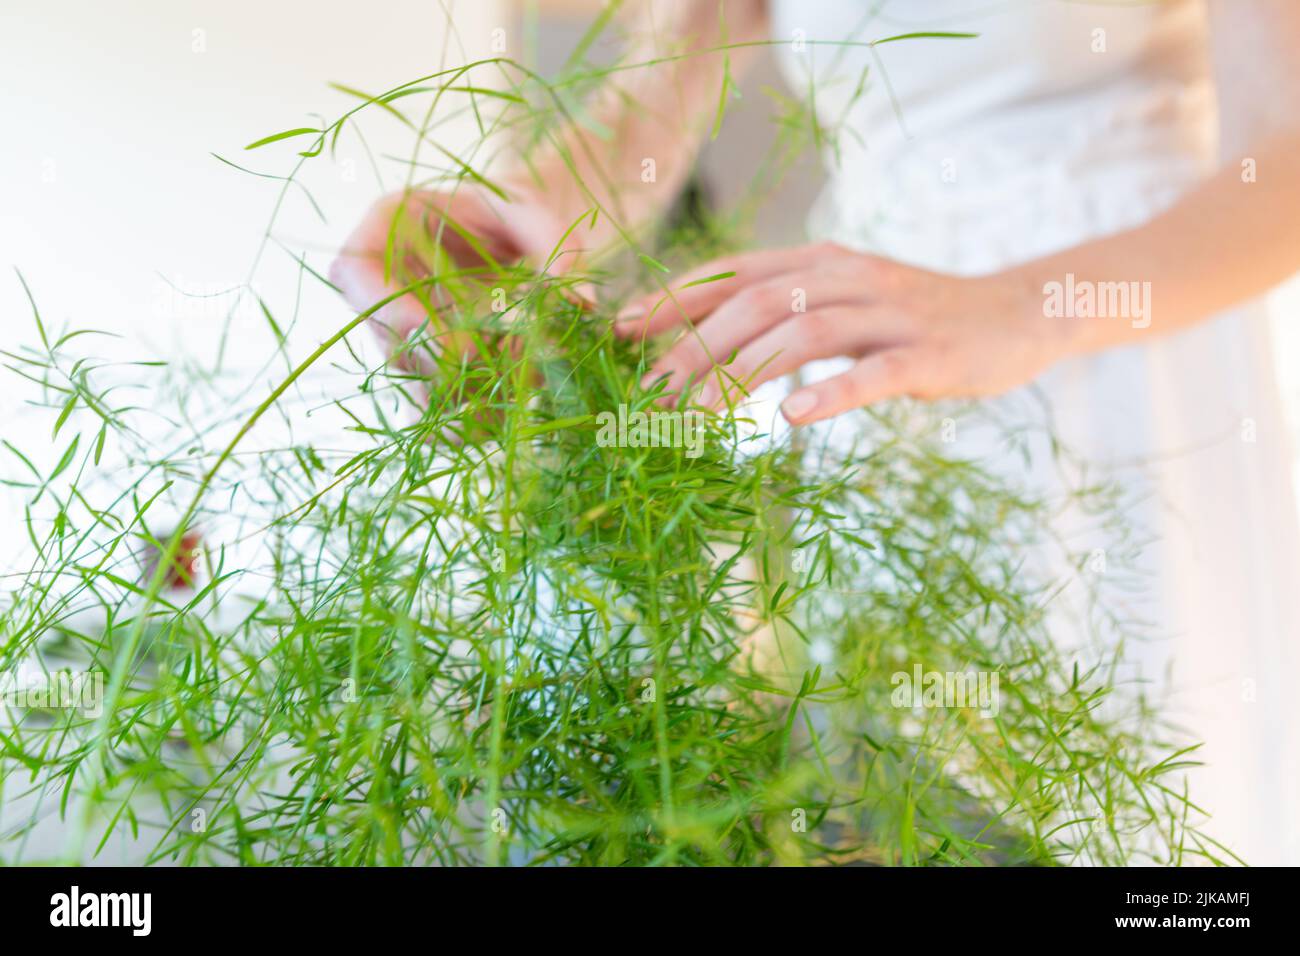 Woman hands touching and caring for the green plant Stock Photo